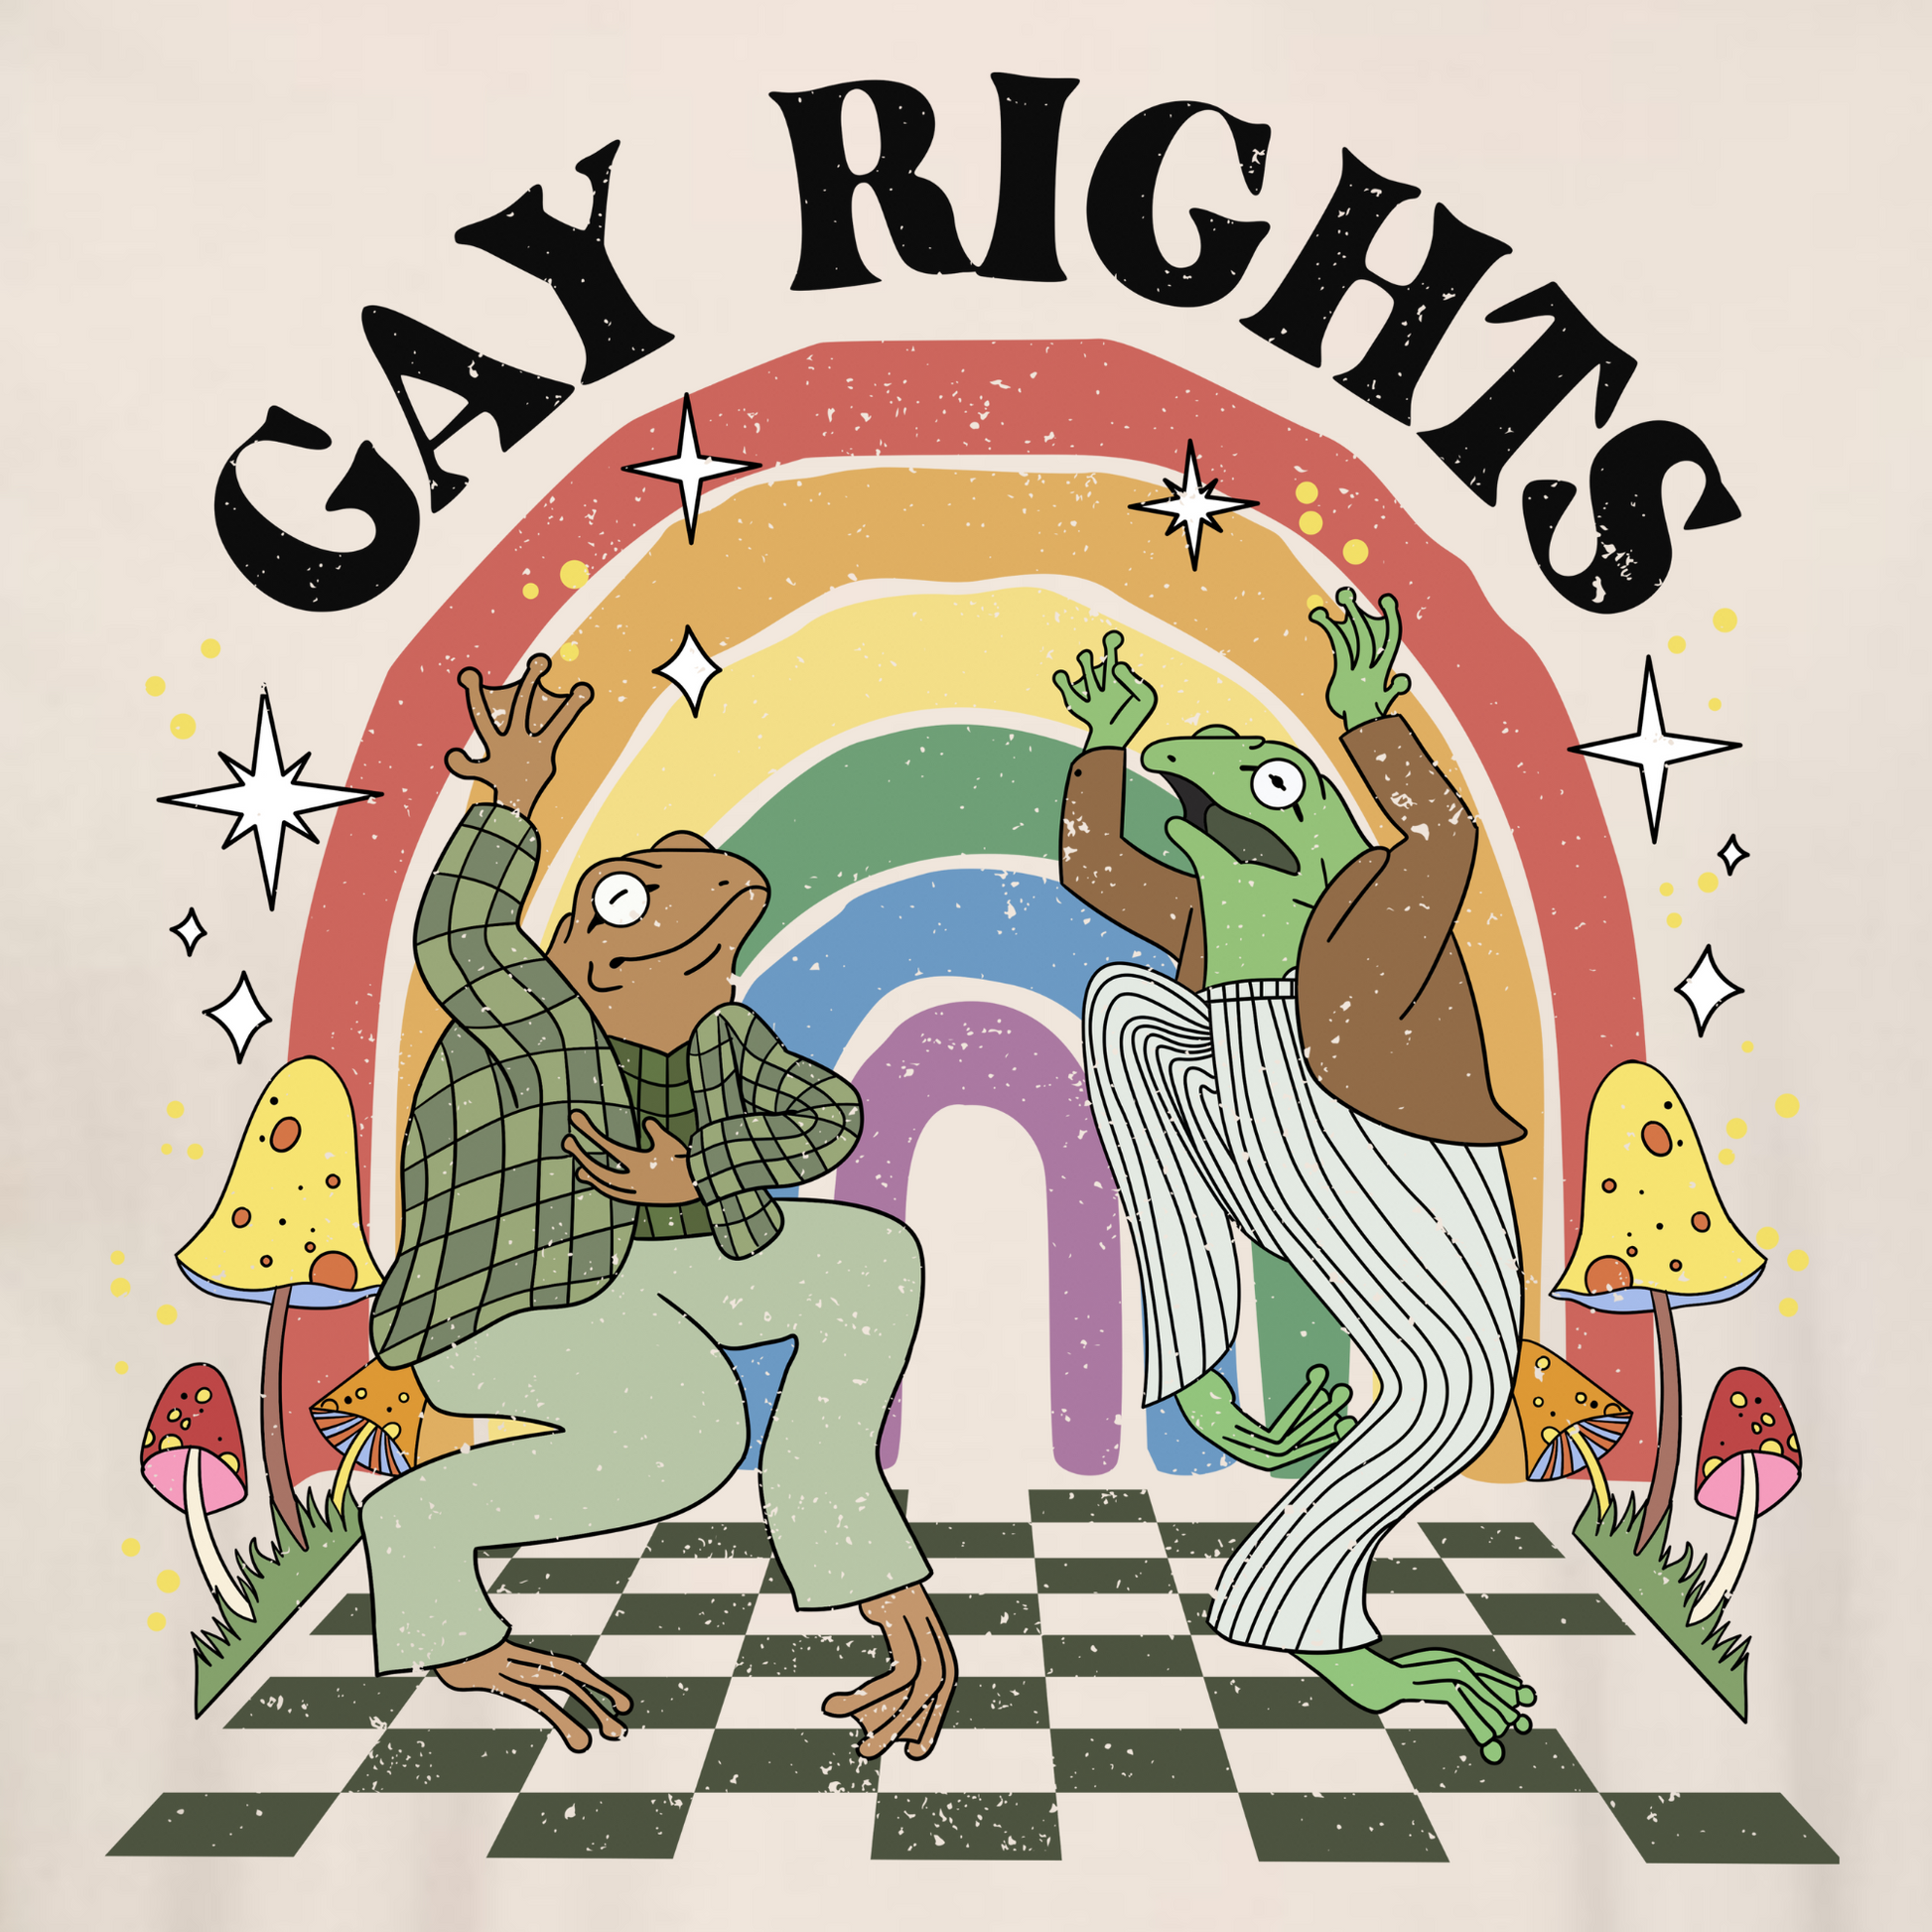 A close up of An ivory shirt with Gay Rights and a Frog and Toad dancing on a checked floor surrounded by mushrooms and with a rainbow in the background